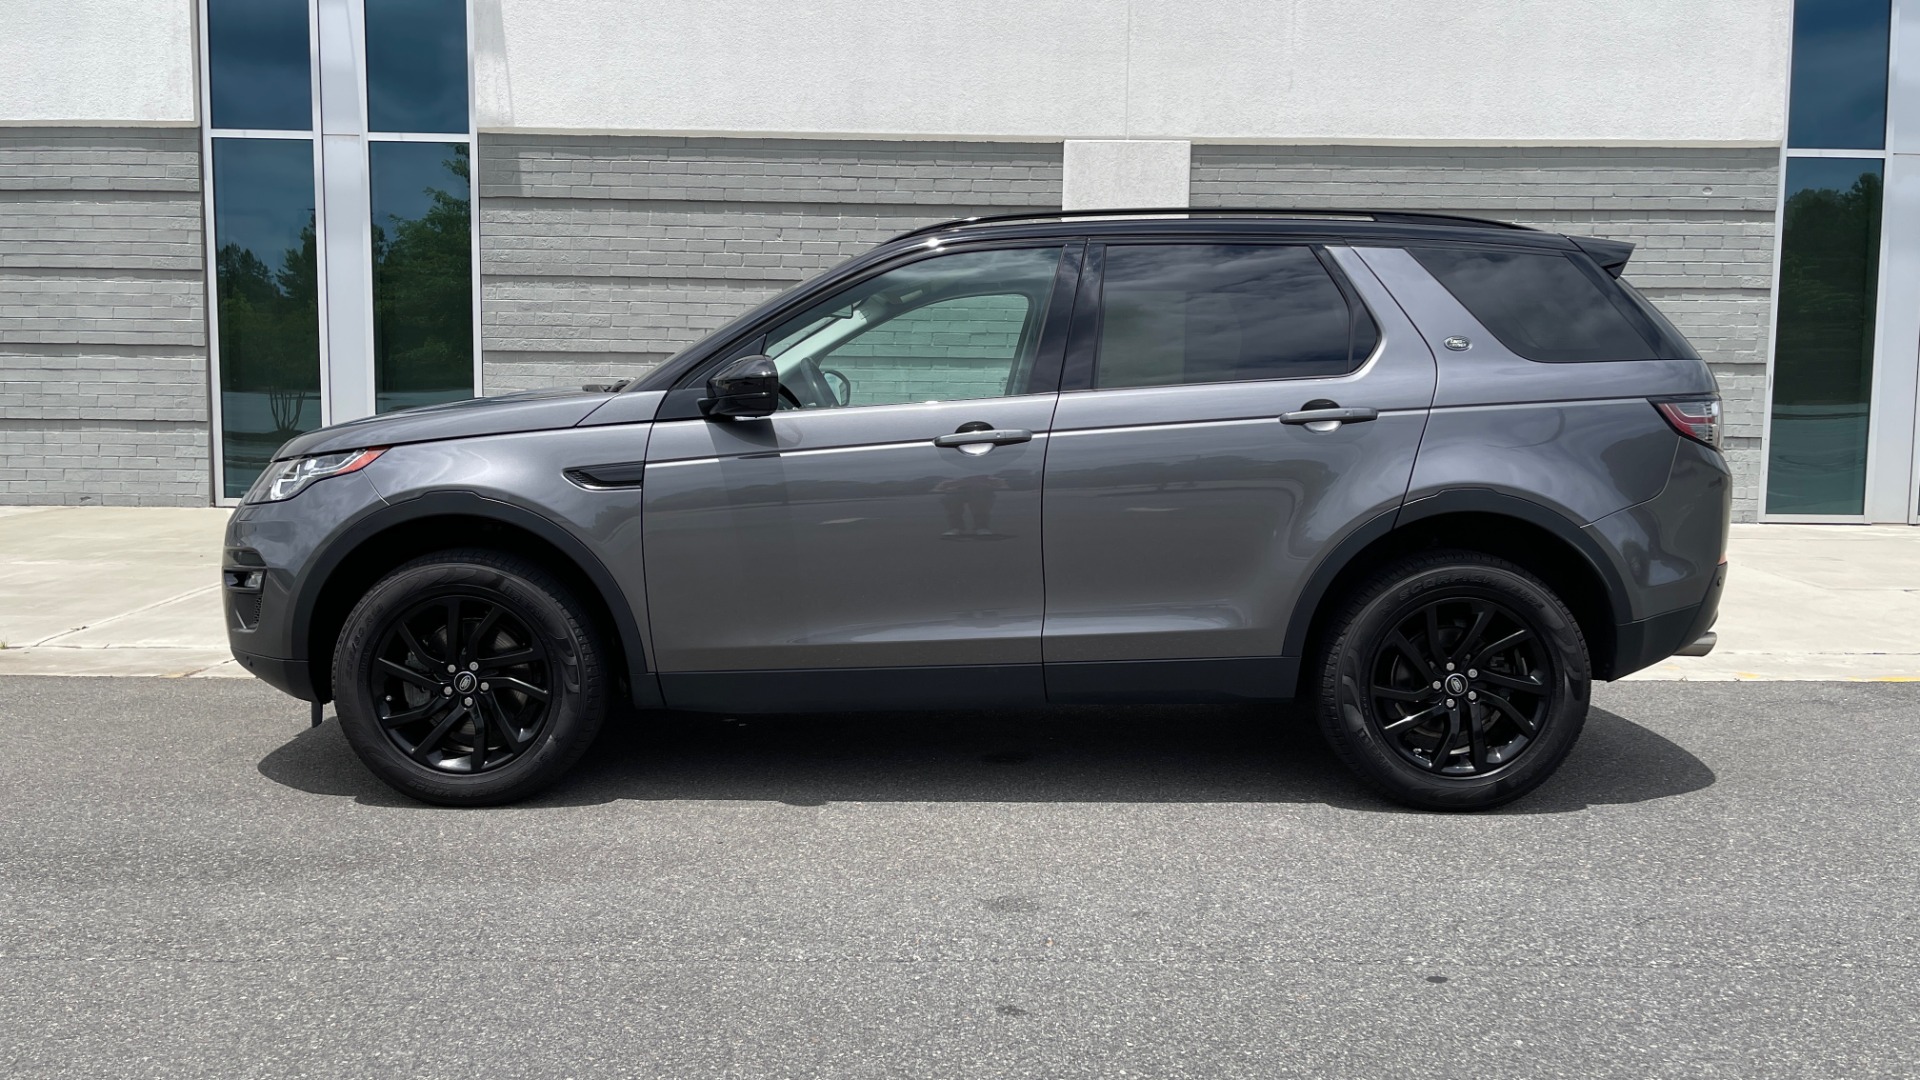 Used 2018 Land Rover DISCOVERY SPORT HSE 4WD / NAV / PANO-ROOF / MERIDIAN  SND / HTD STS / LANE ASST / REARVIEW For Sale ($34,295) | Formula Imports  Stock #F11211